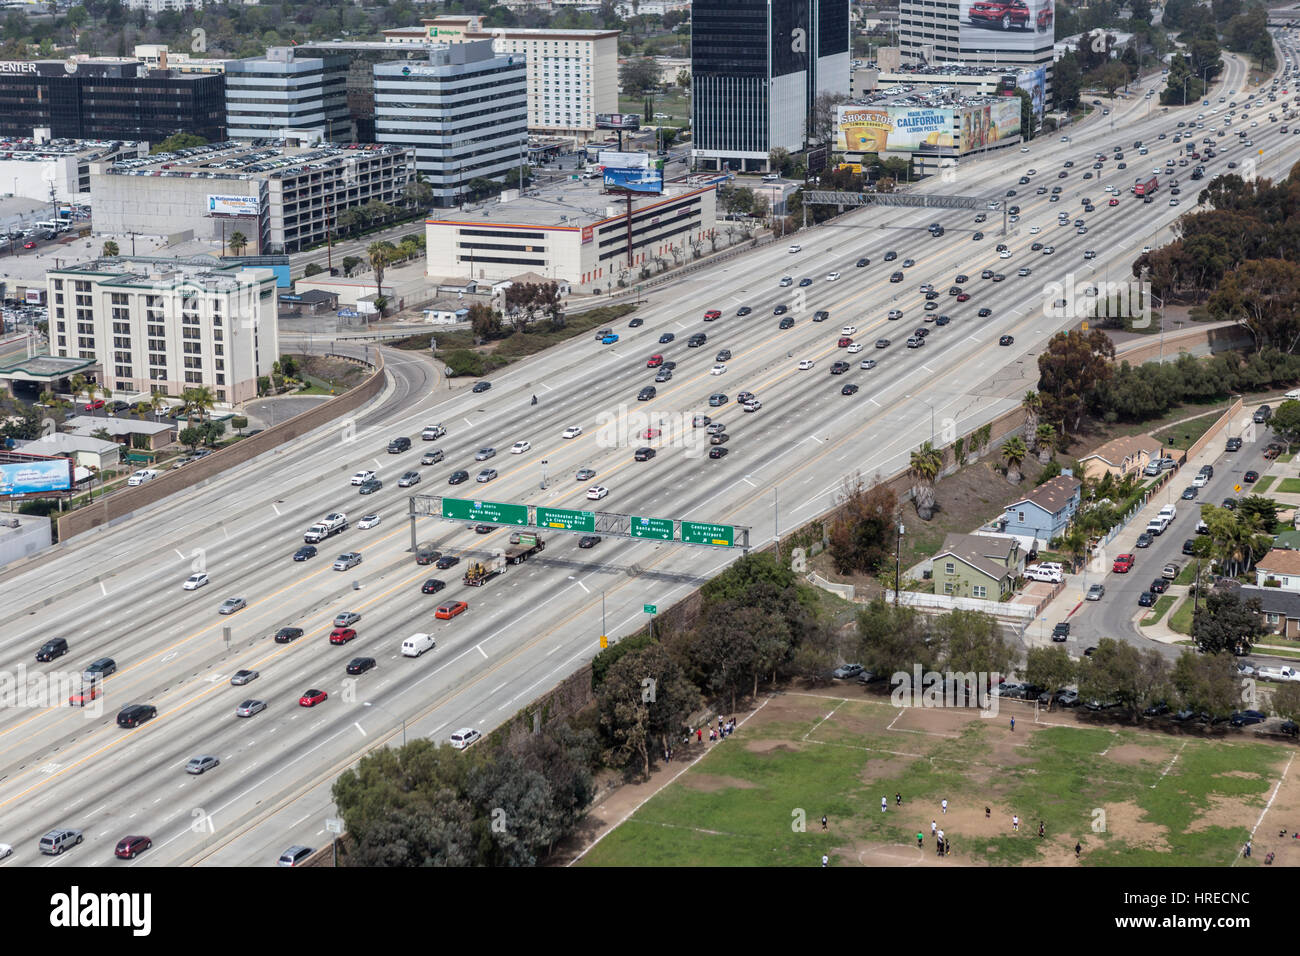 Los Angeles, California, USA - March 22, 2014:  Aerial view of free flowing traffic on Los Angele's giant San Diego 405 Freeway. Stock Photo